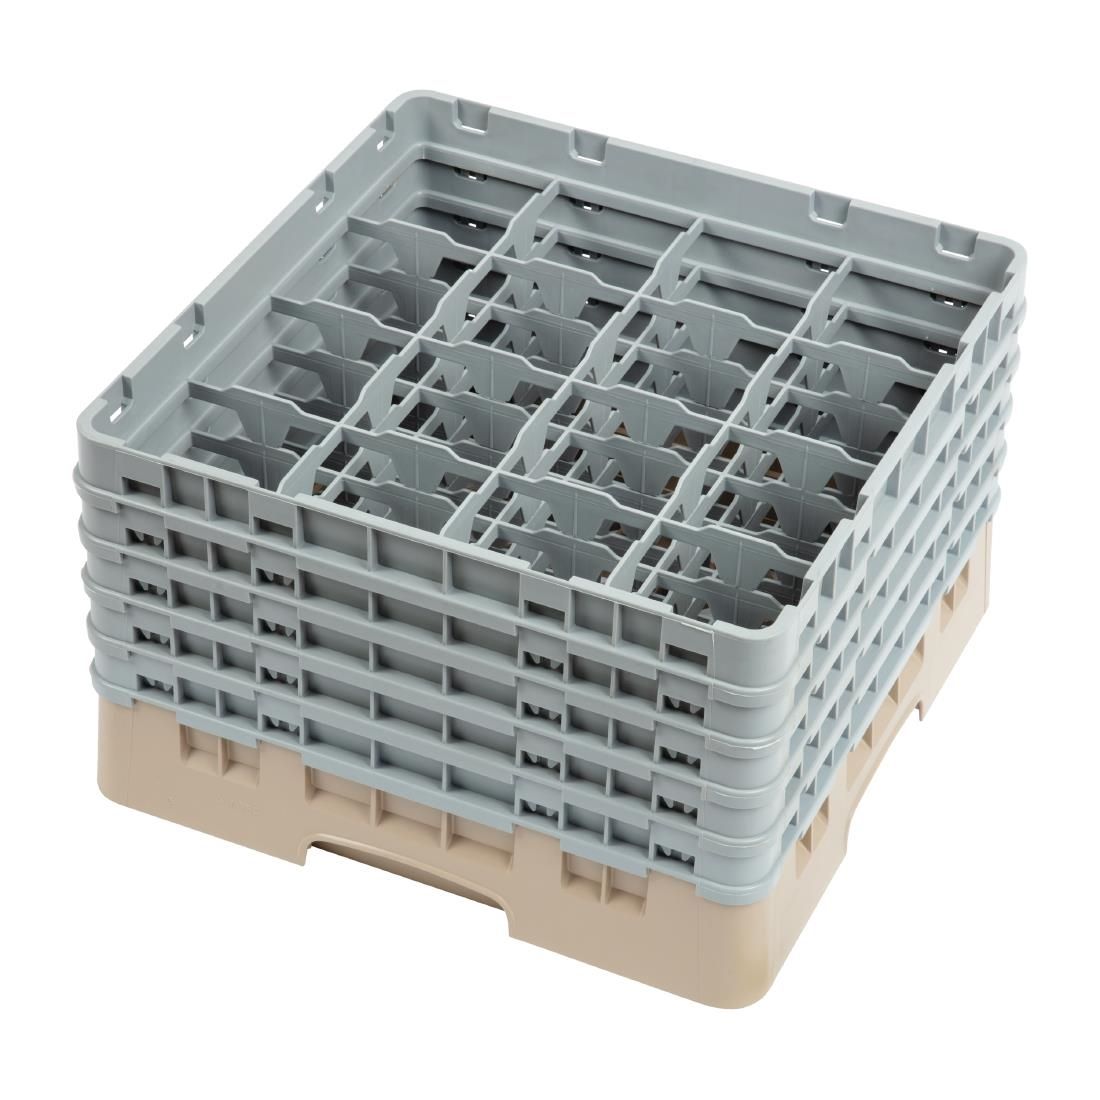 Cambro Camrack Beige 16 Compartments Max Glass Height 257mm JD Catering Equipment Solutions Ltd